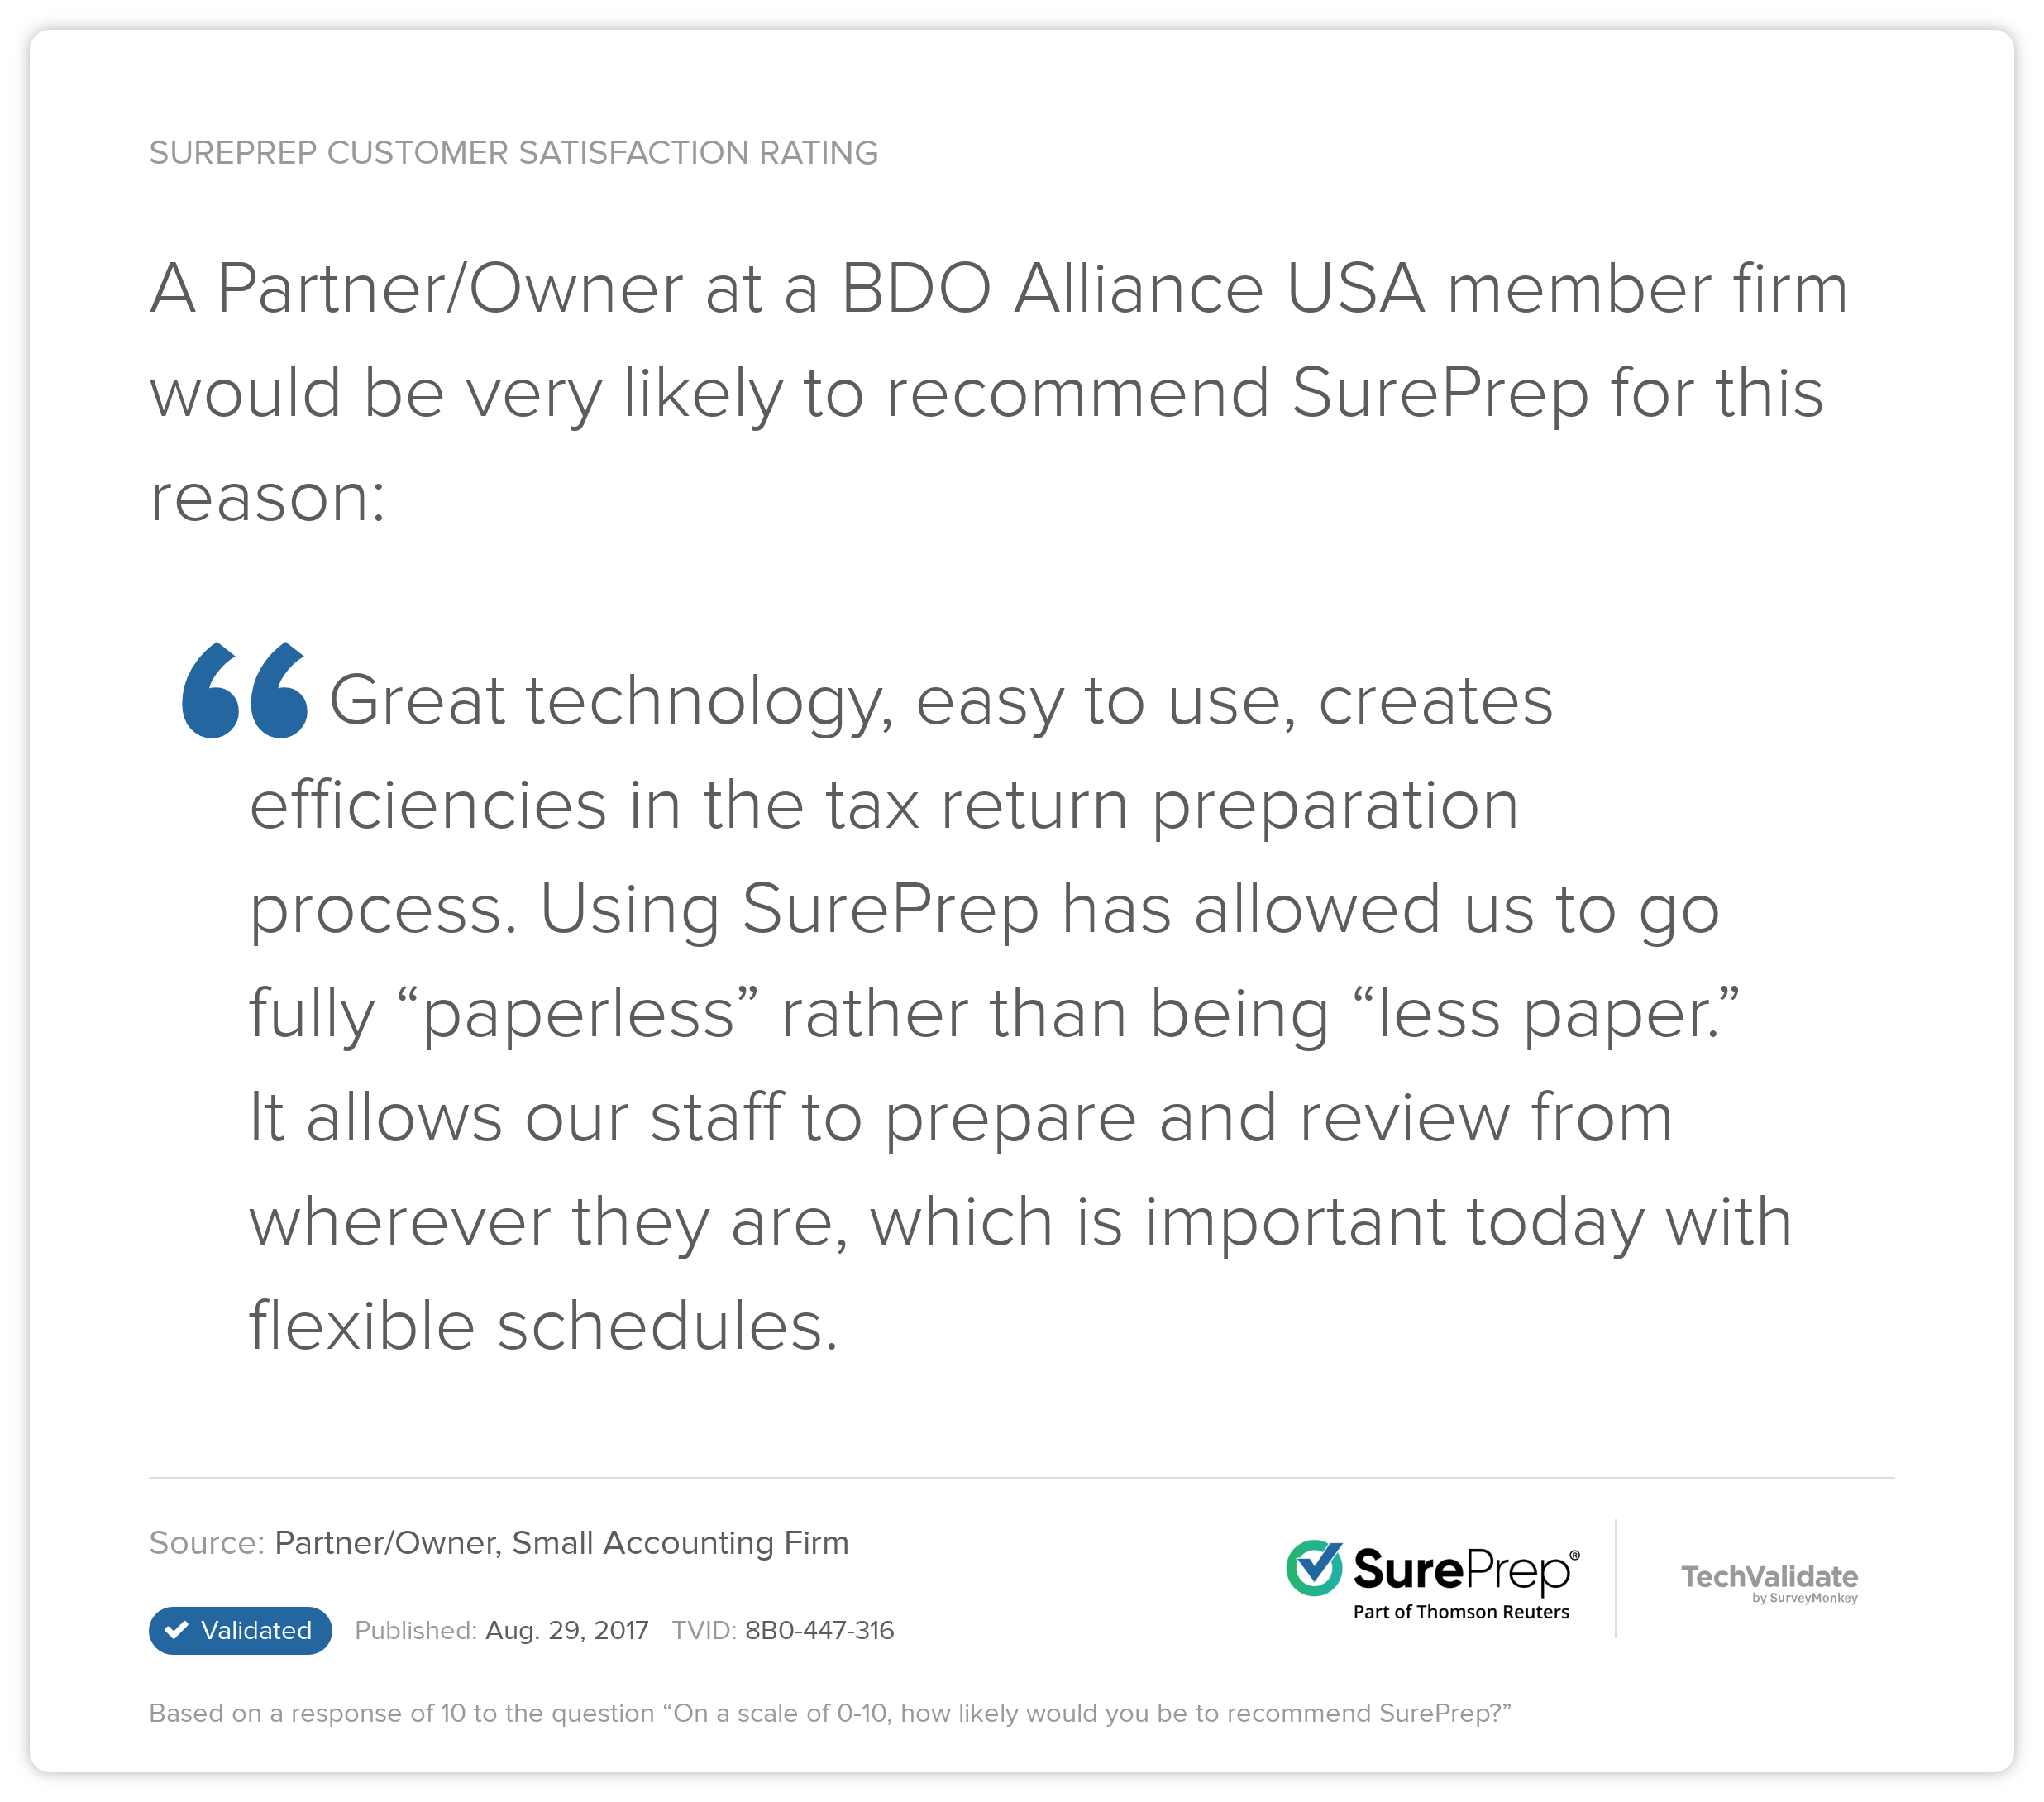 BDO Alliance USA Customer Review: "Great technology, easy to use, creates efficiencies in the tax return preparation process. Using SurePrep has allowed us to go fully 'paperless' rather than being 'less paper.; It allows our staff to prepare and review from wherever they are, which is important today with flexible schedules."